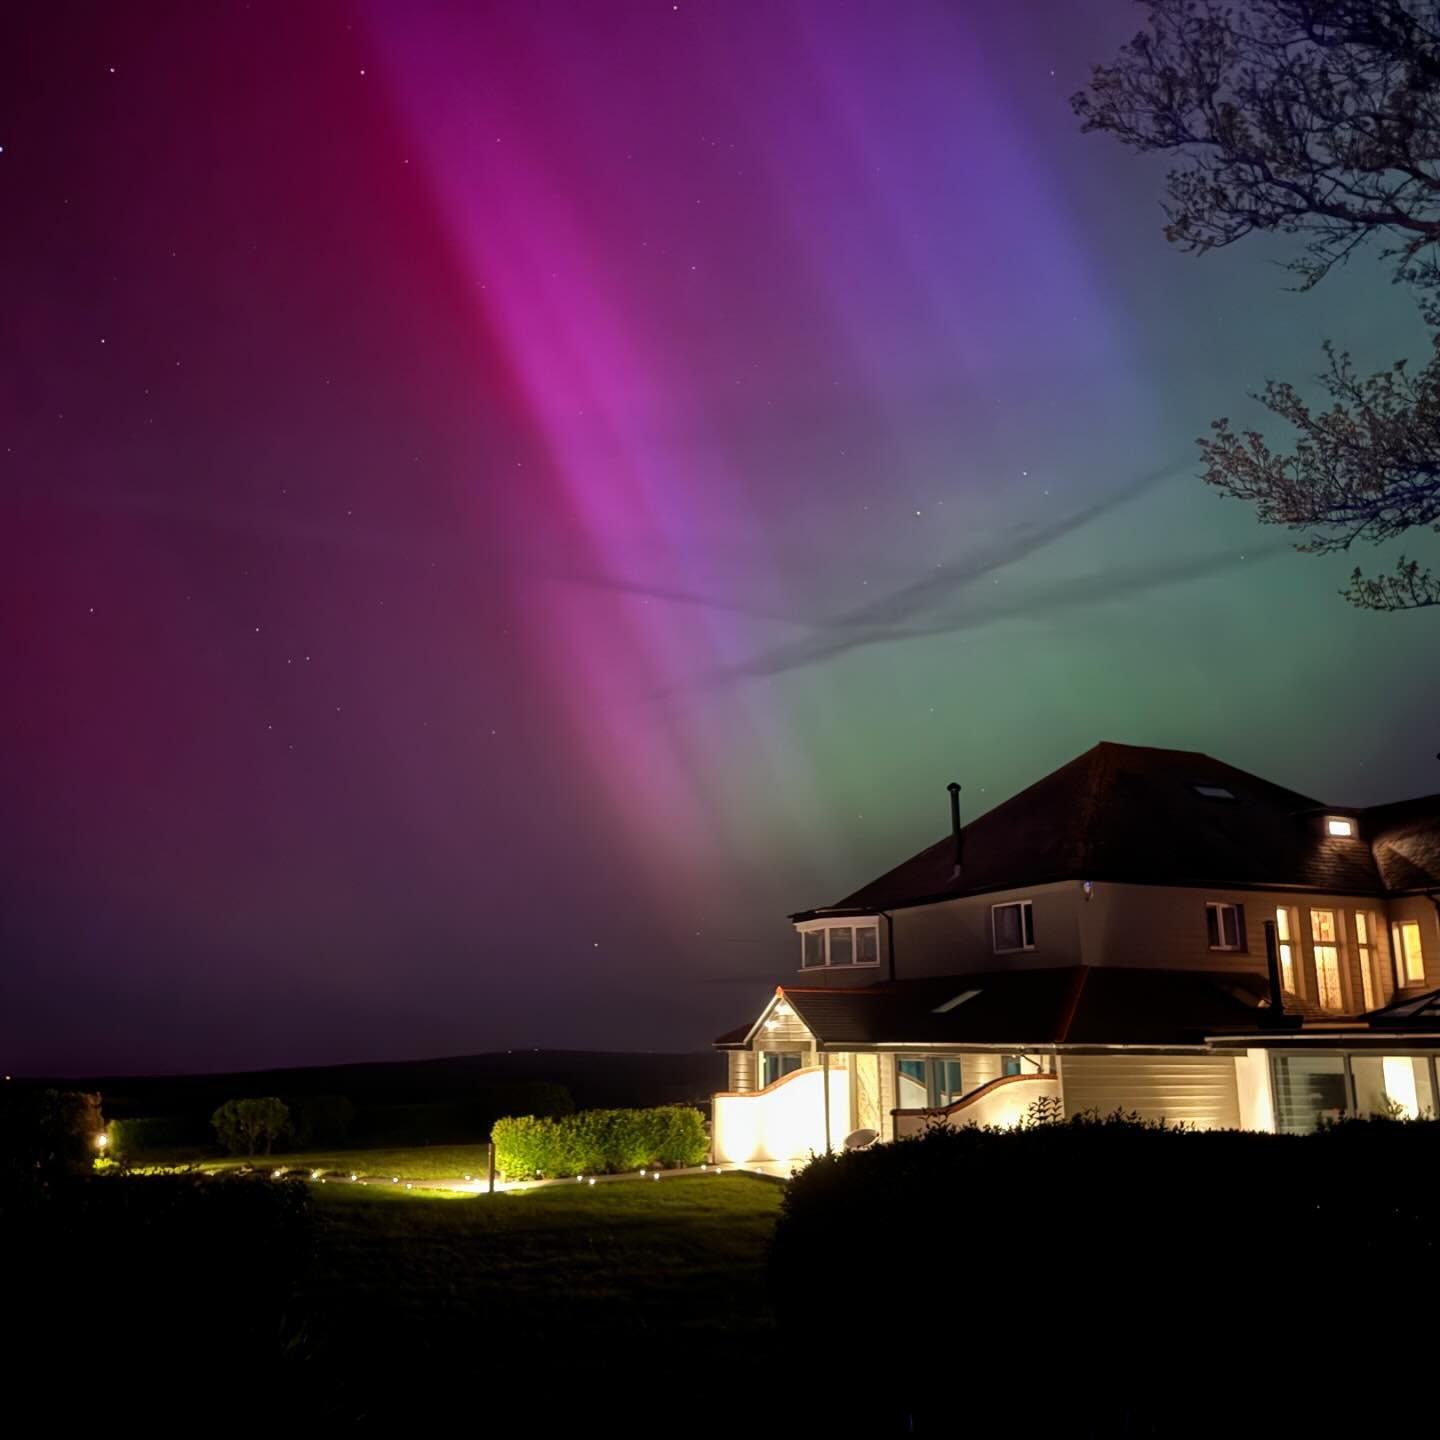 More of tonight&rsquo;s Northern Lights taken in the last 20 minutes over Wooldown - beautiful swirling curtains of light in the night sky.

You may not see it by eye but your camera should pick up the stunning array of colours from green to pink and